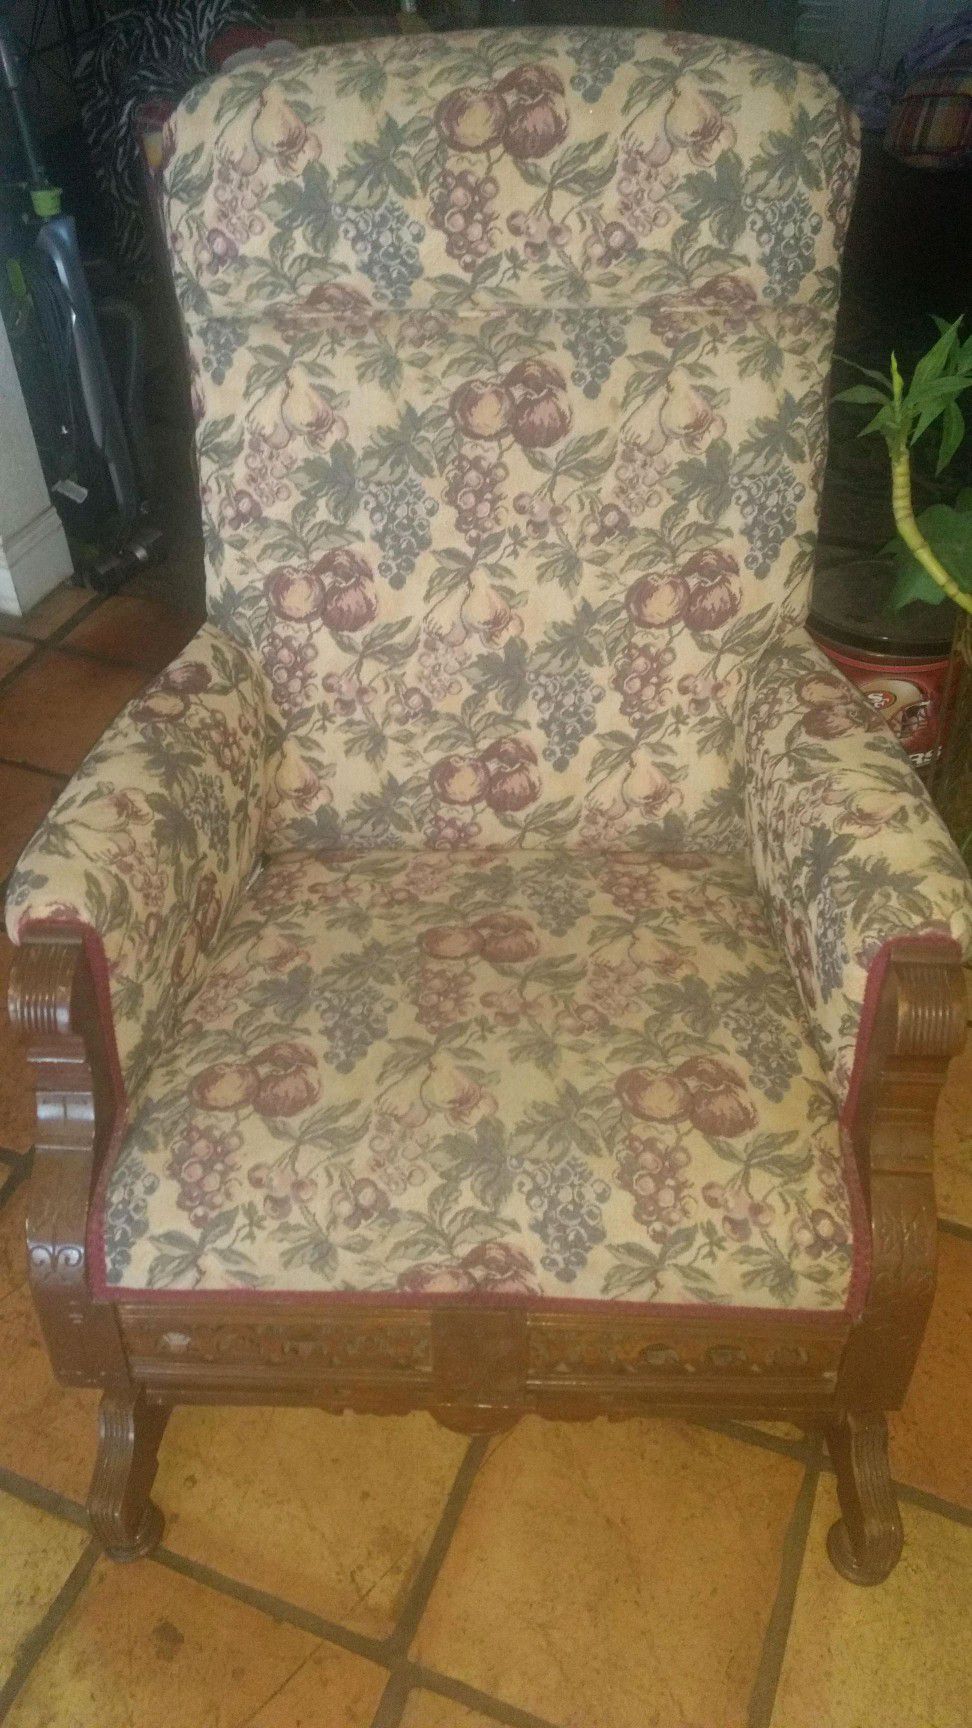 Antique Rocking Chair (negotiable)